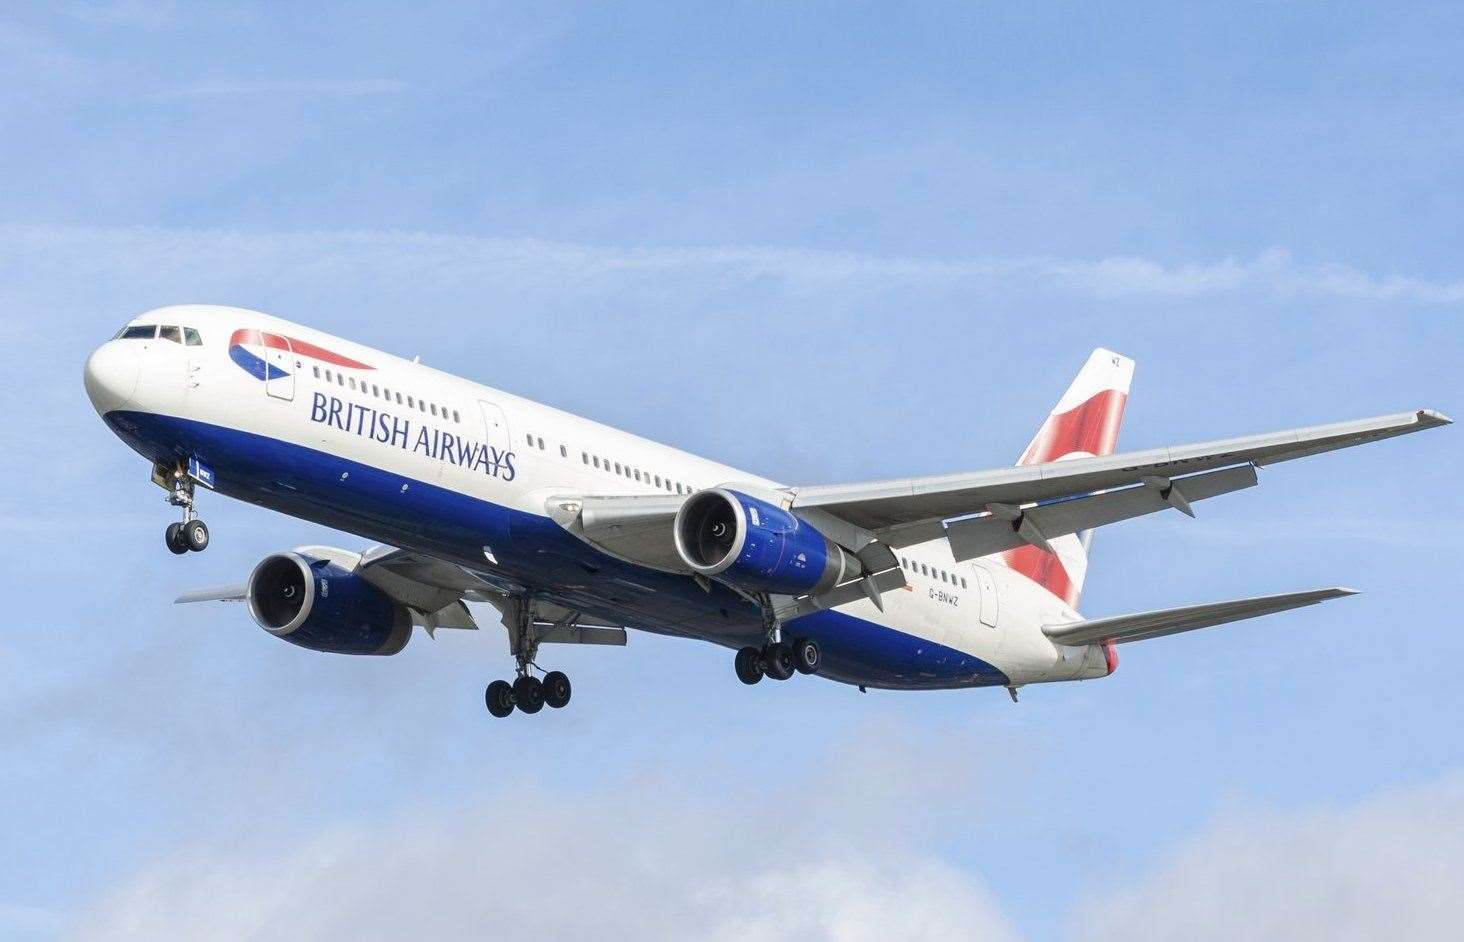 British Airways is among those flight operators working with the government to rescue Brits trapped abroad